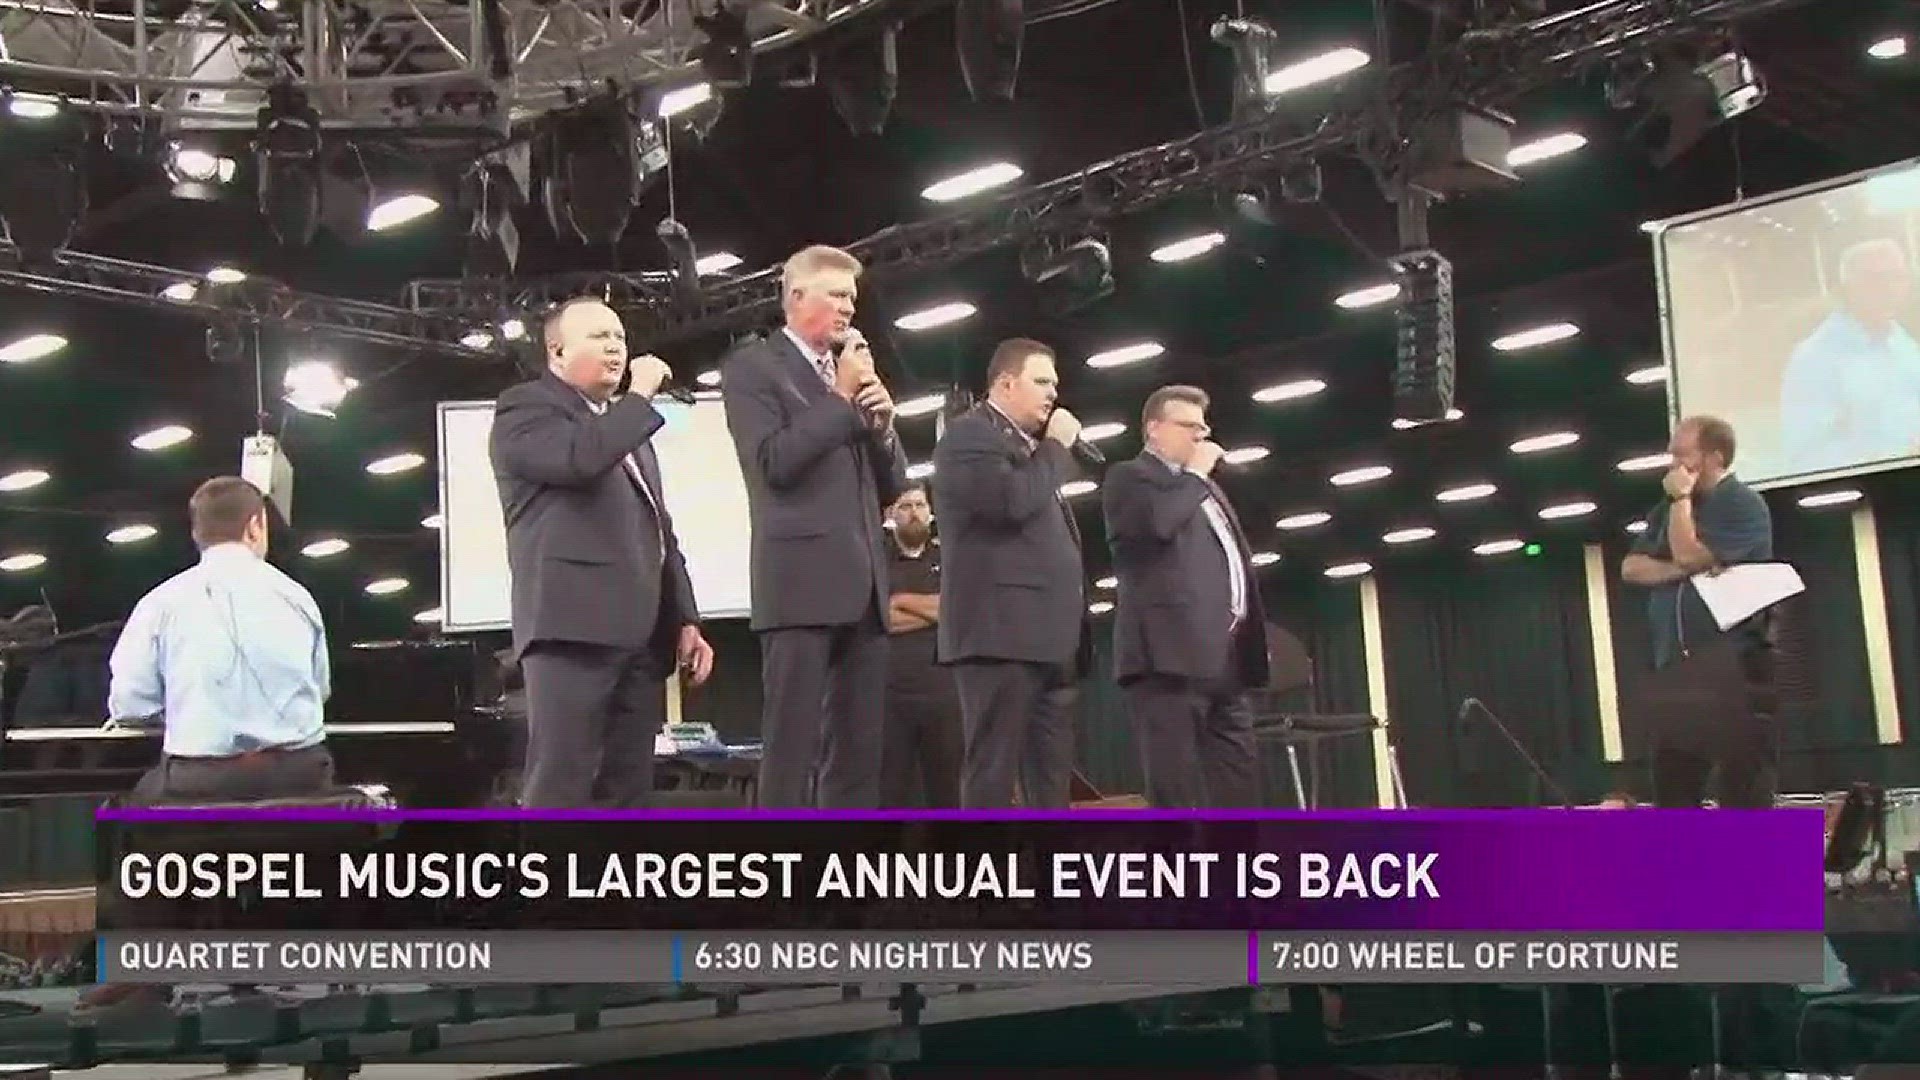 Sept. 25, 2017: Gospel music's largest annual event is back in Pigeon Forge this week.